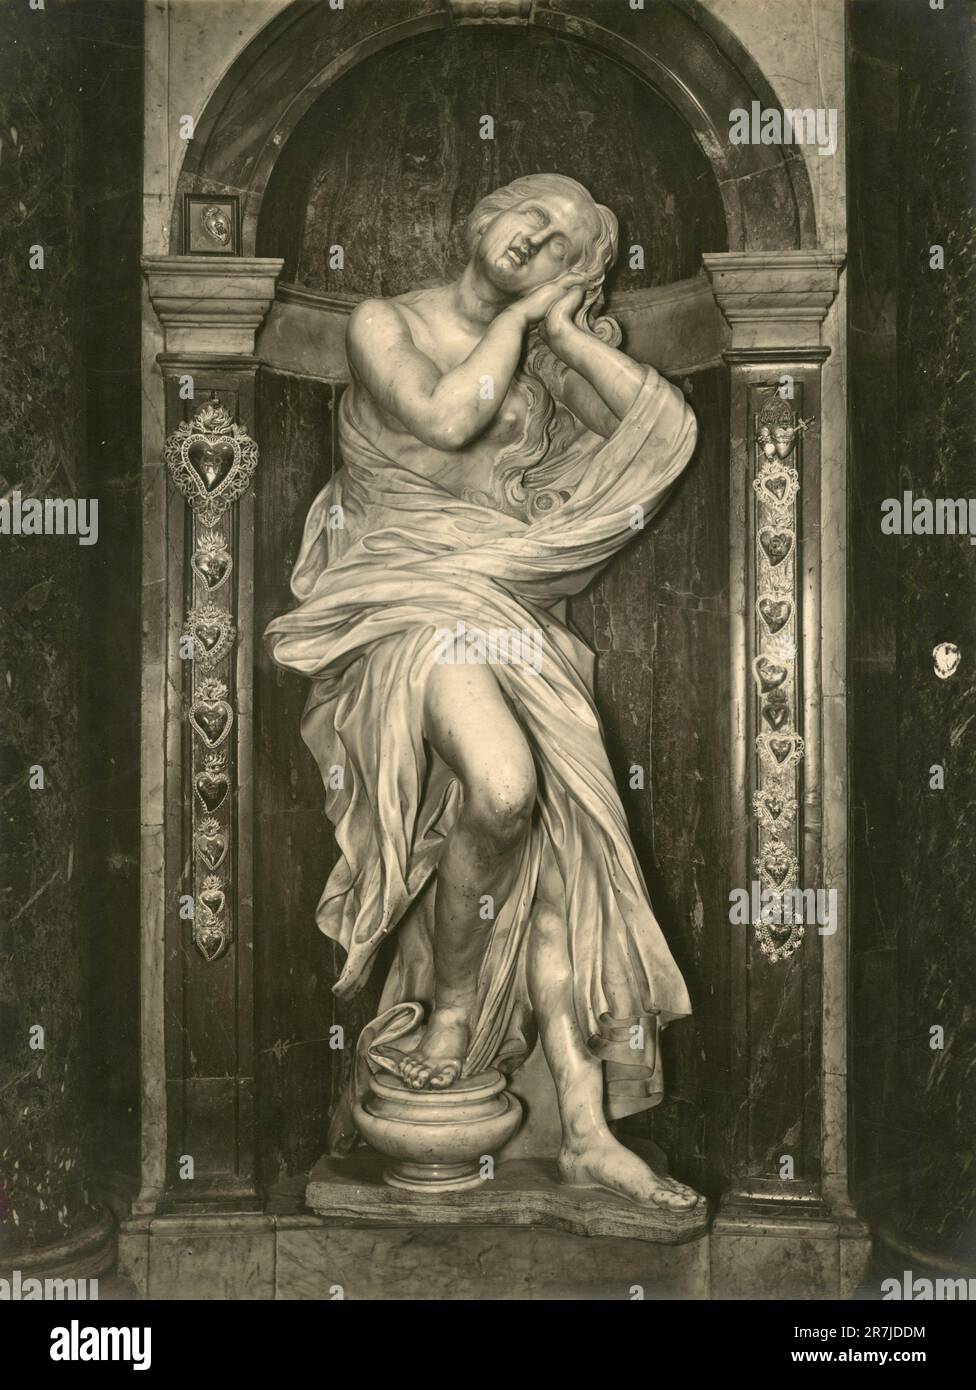 St. Mary Magdalene, marble sculptur by Italian artist Gianlorenzo Bernini, Siena Cathedral, Italy 1900s Stock Photo